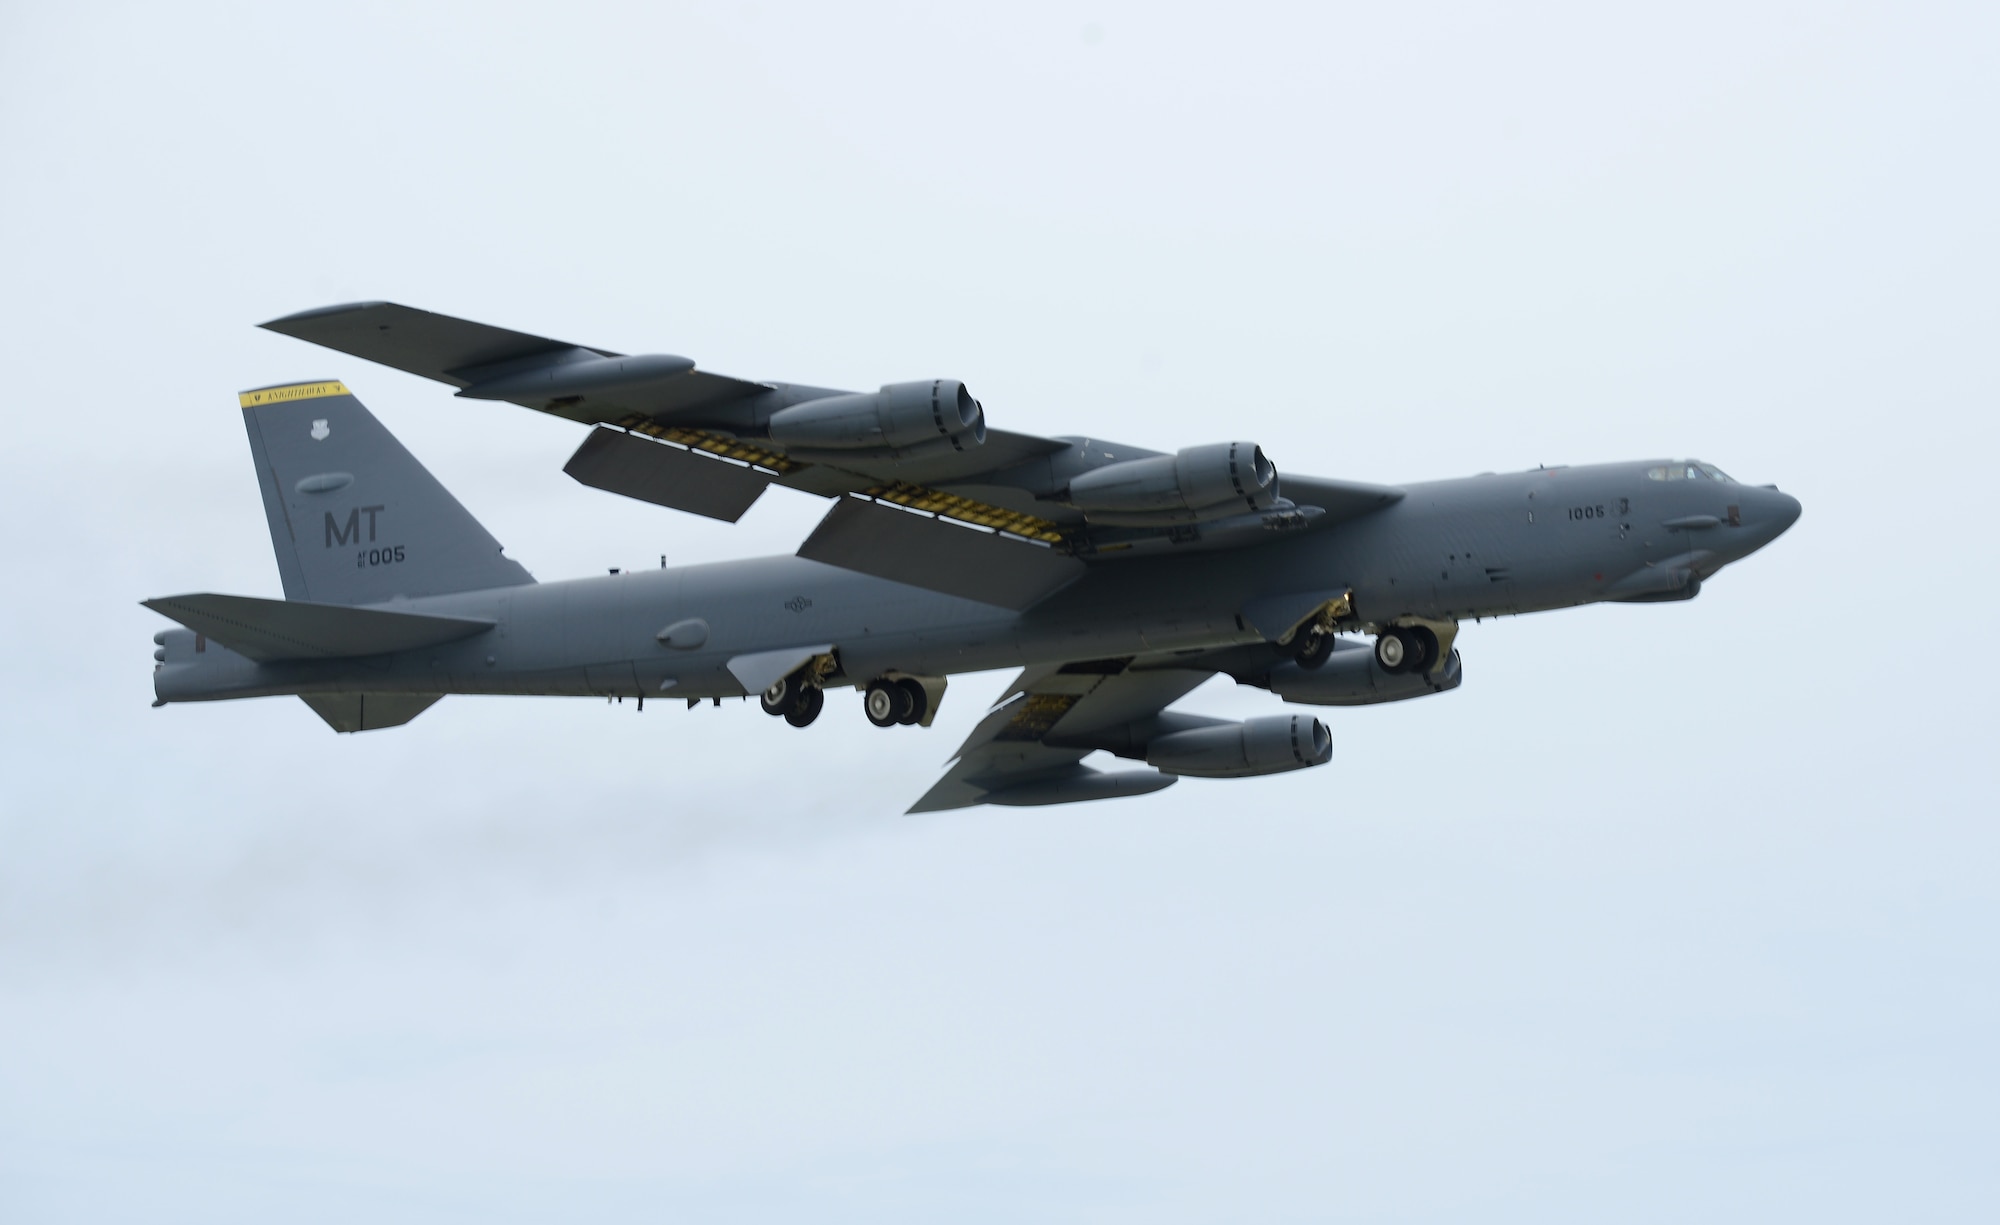 A U.S. Air Force B-52 Stratofortress takes off from Andersen Air Force Base, Guam, for an integrated bomber operation Aug.17, 2016. This mission marks the first time in history that all three of Air Force Global Strike Command's strategic bomber aircraft are simultaneously conducting integrated operations in the U.S. Pacific Command area of operations. As of Aug. 15, the B-1 Lancer will be temporarily deployed to Guam in support of U.S. Pacific Command's Continuous Bomber Presence mission. (U.S. Air Force photo by Airman 1st Class Arielle Vasquez/Released)